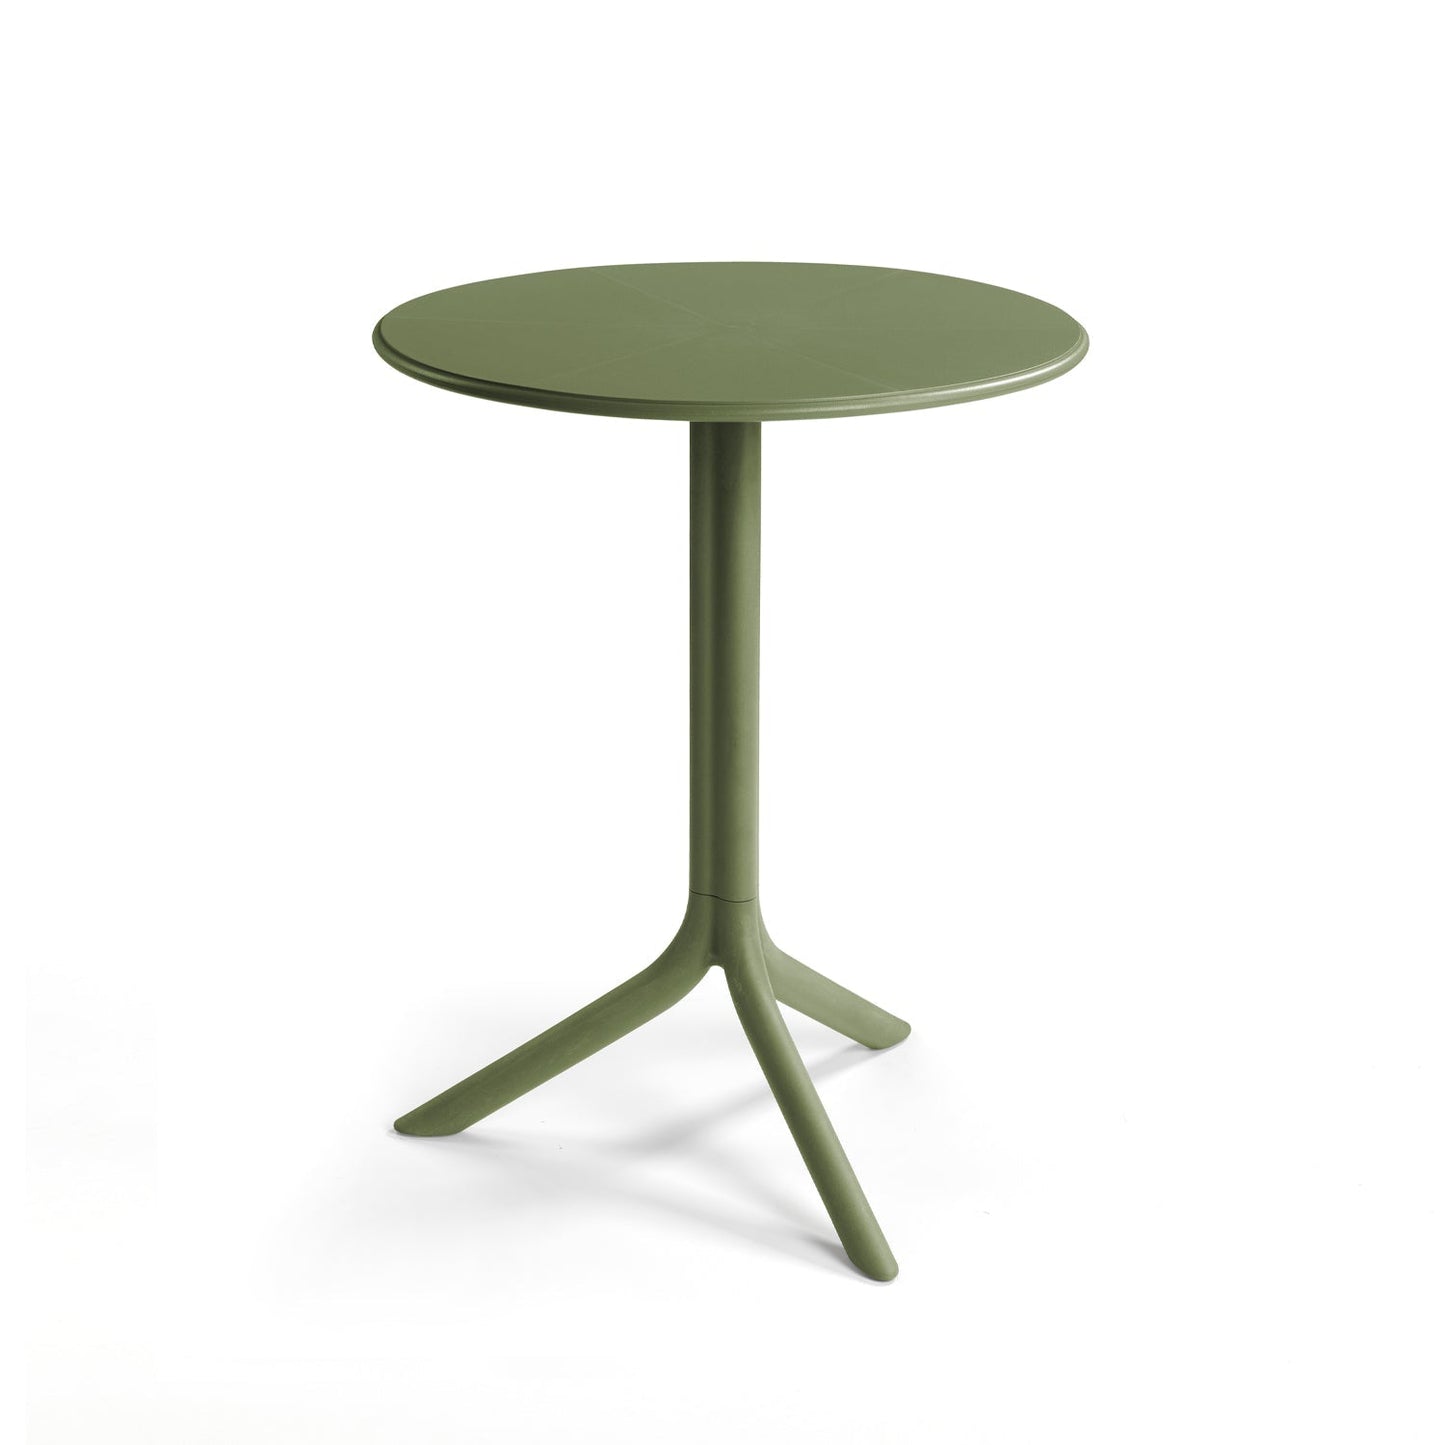 Spritz Table In Olive